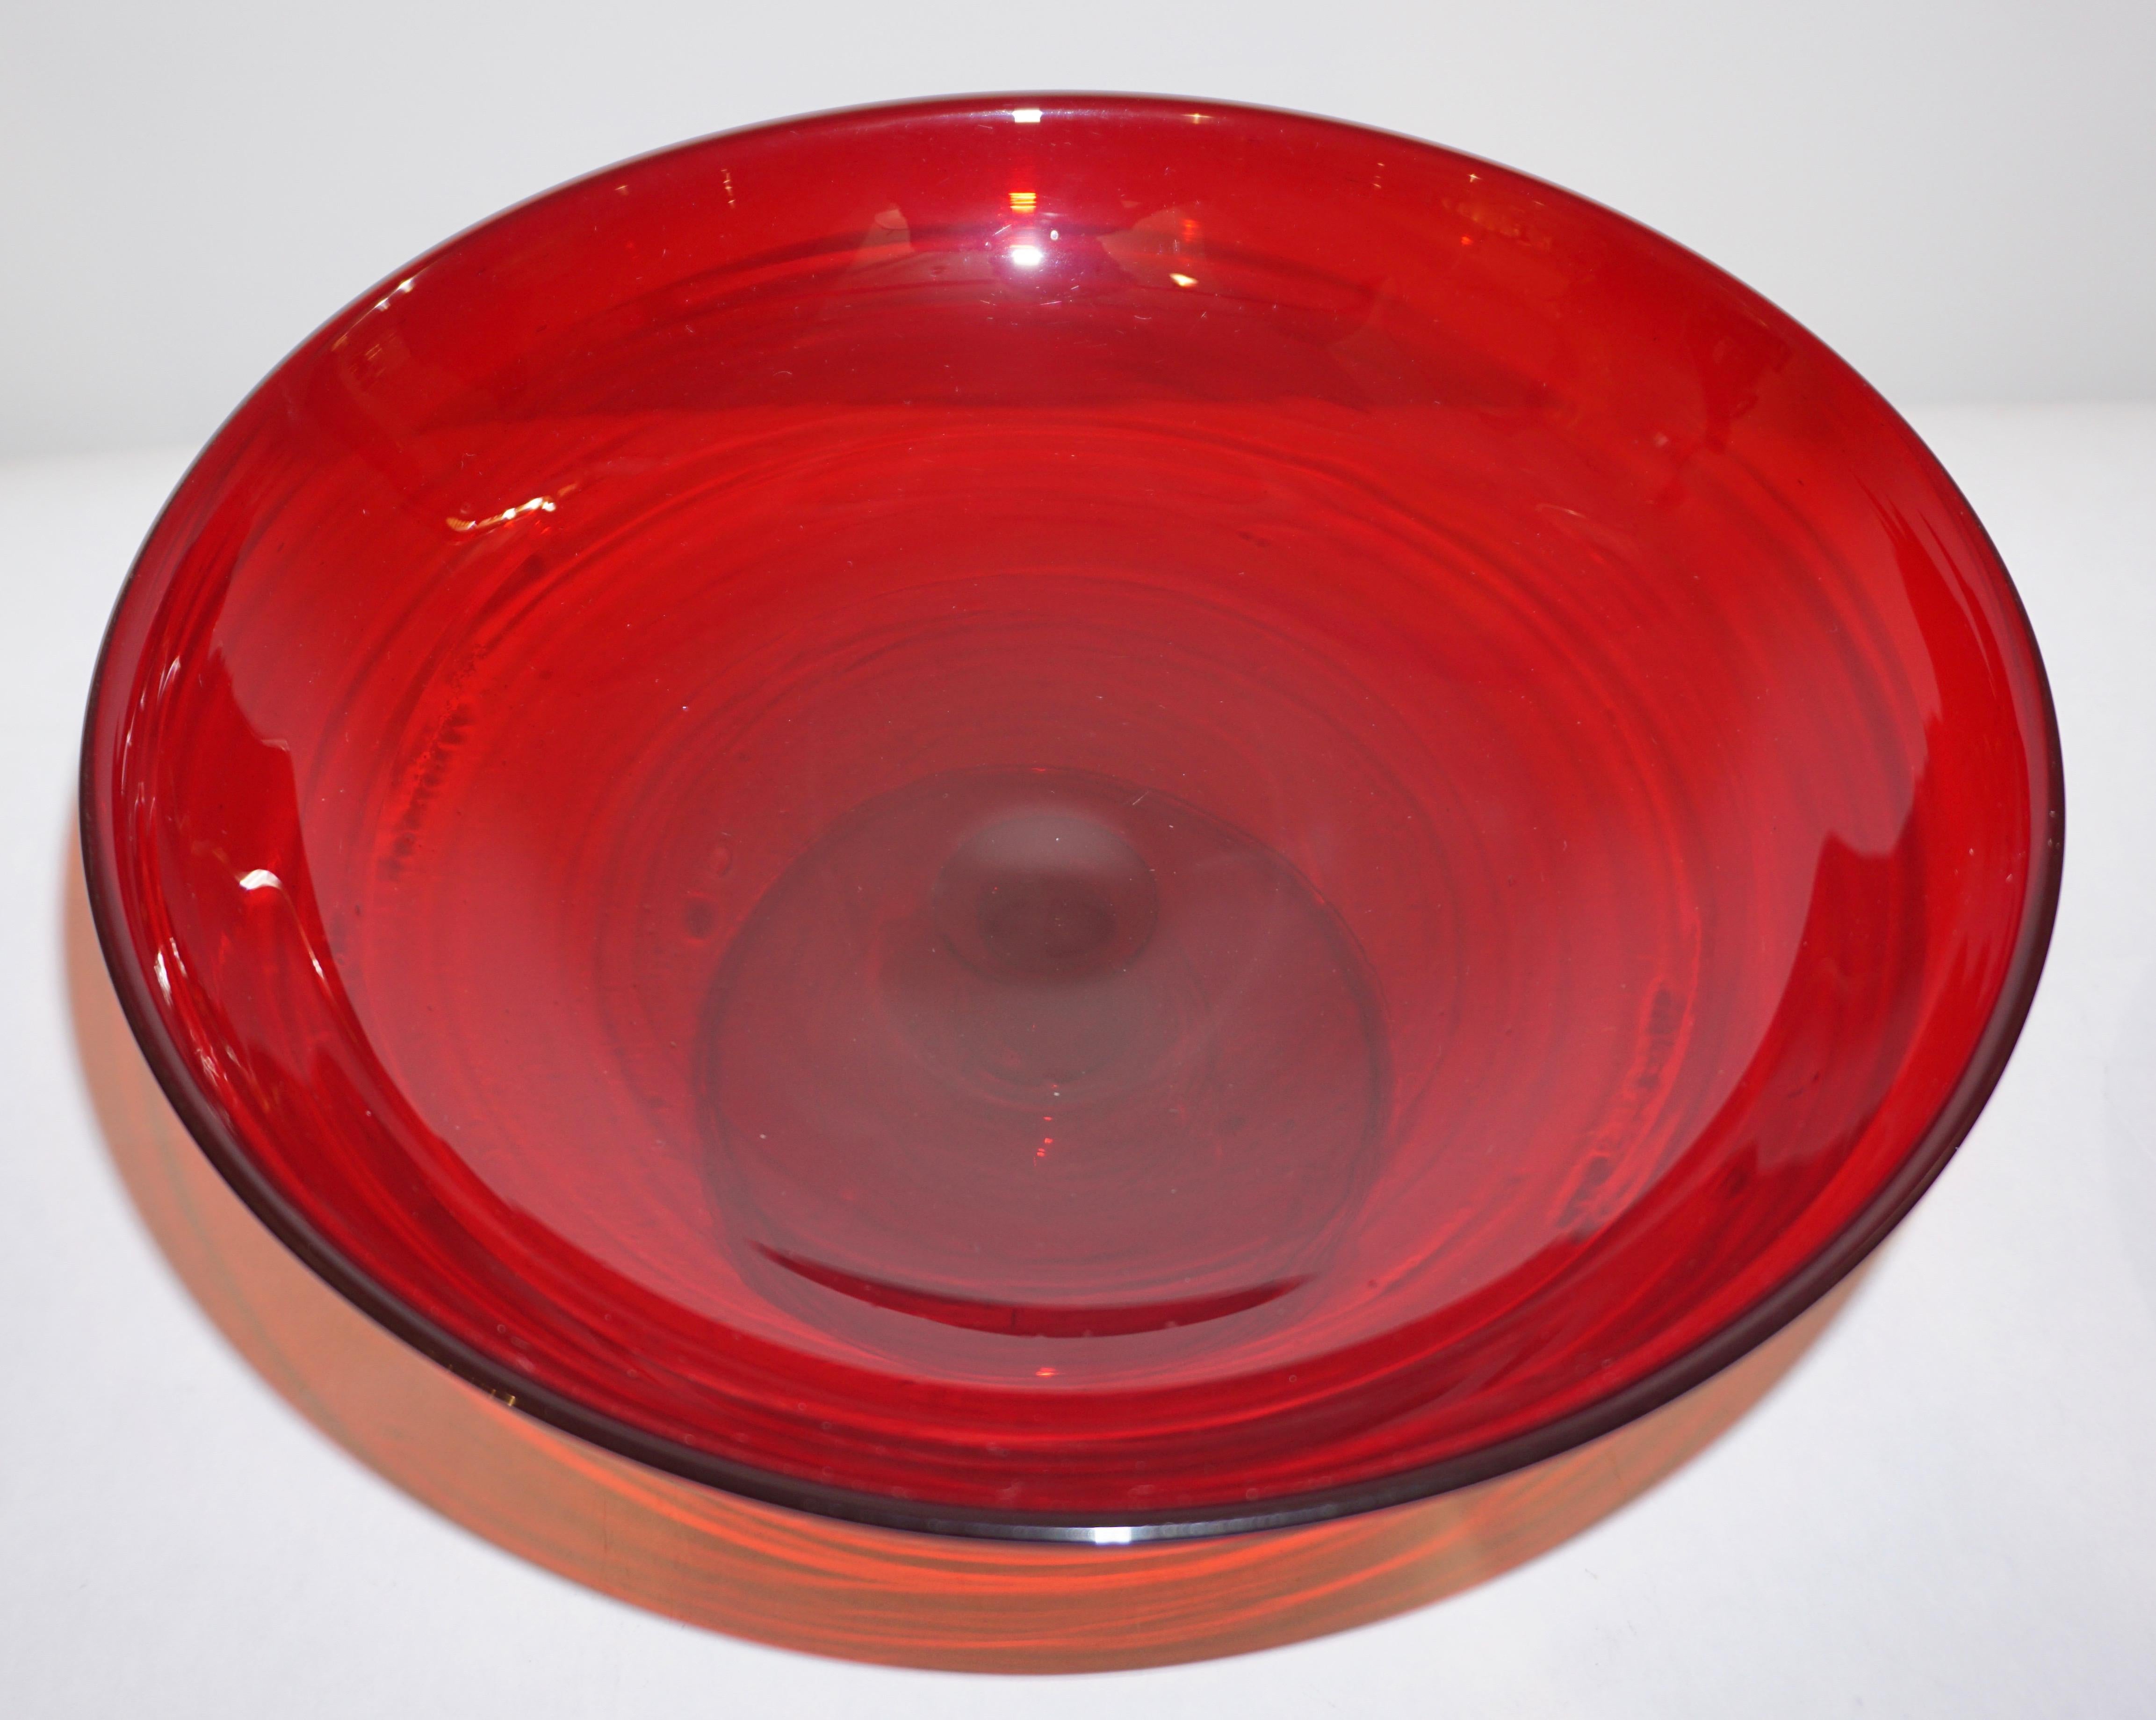 Exquisite Venetian Murano glass tazza centerpiece, in rich deep crimson red, highest quality of execution: delicately blown with rims and raised on footed base. With engraved signature.
Diameter of base: 4.3 inches.
Can be accompanied as a set by